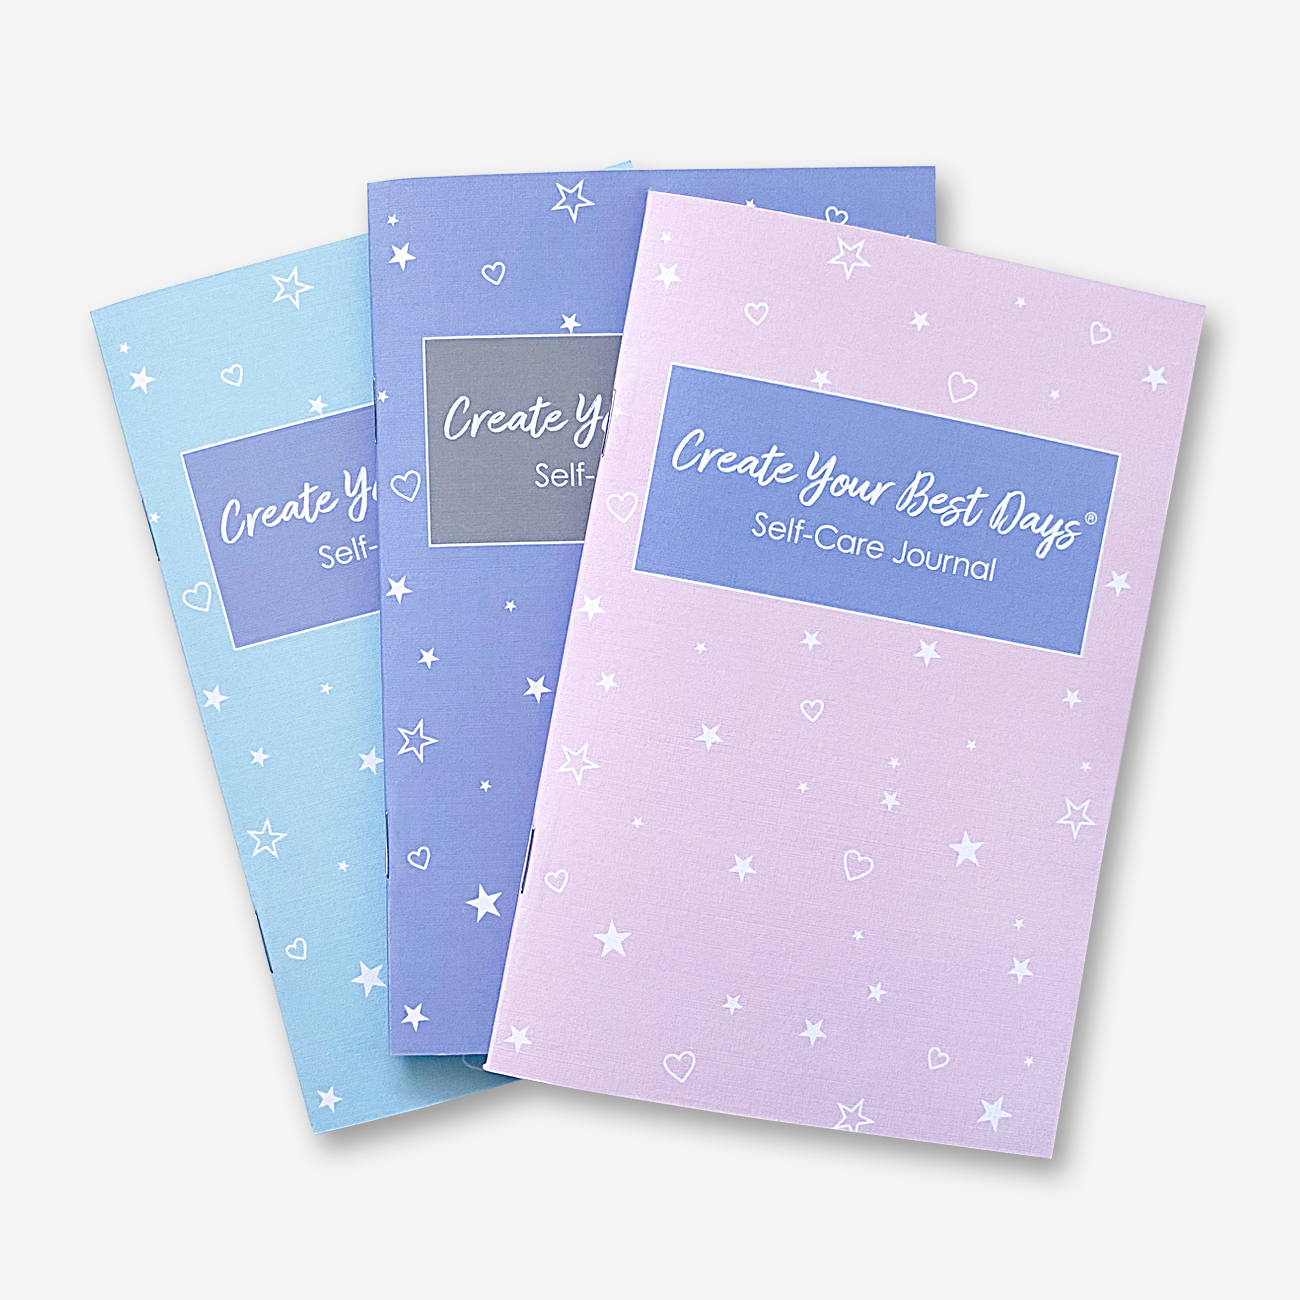 Create Your Best Days Self-Care Journal Set (3): Cotton Candy